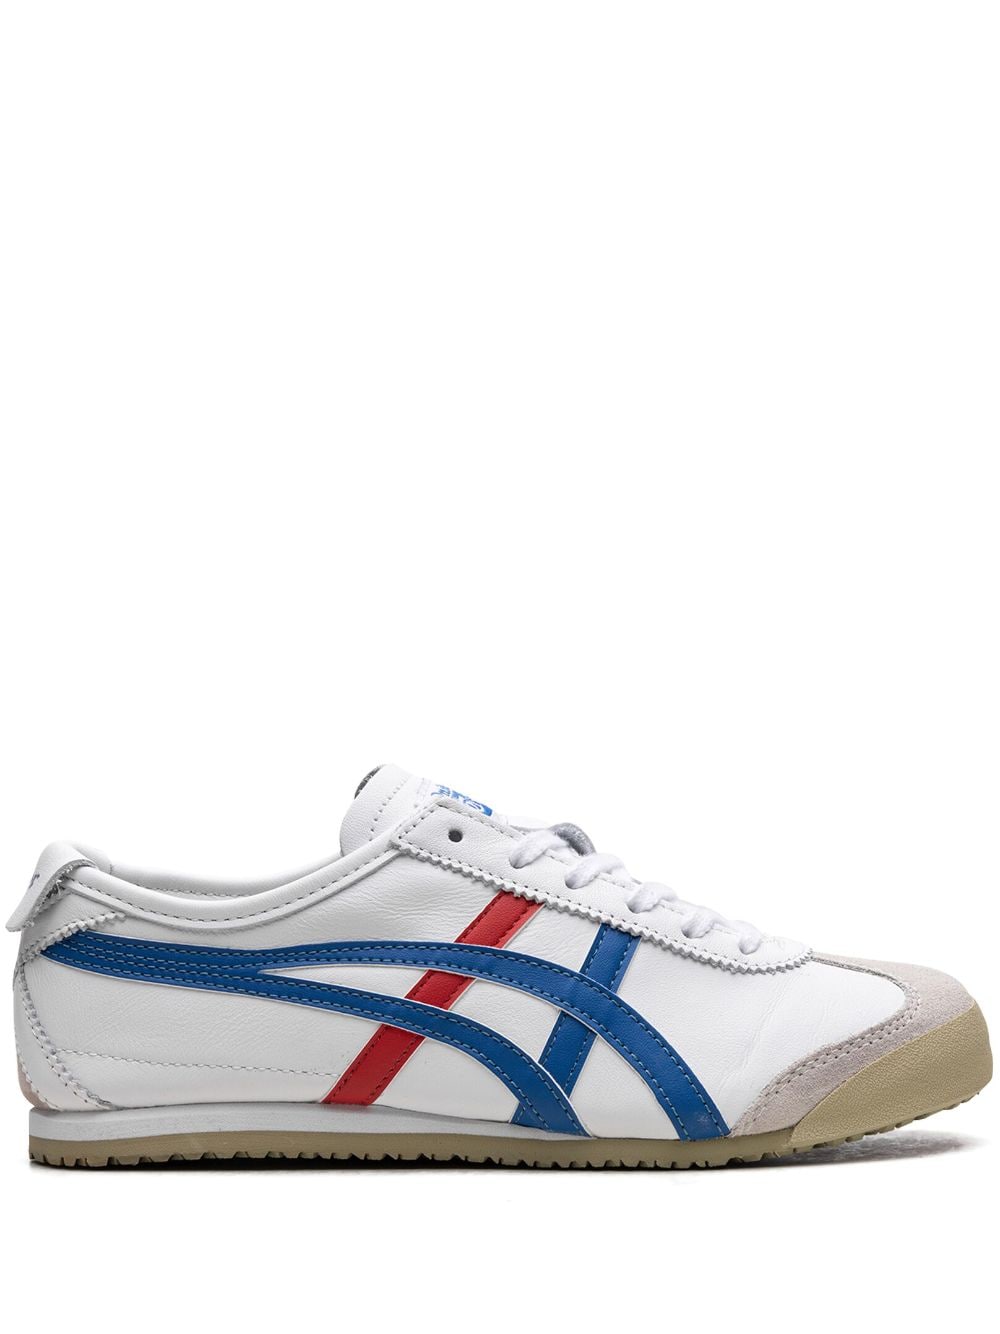 Onitsuka Tiger Mexico 66 "White/Blue/Red" sneakers von Onitsuka Tiger